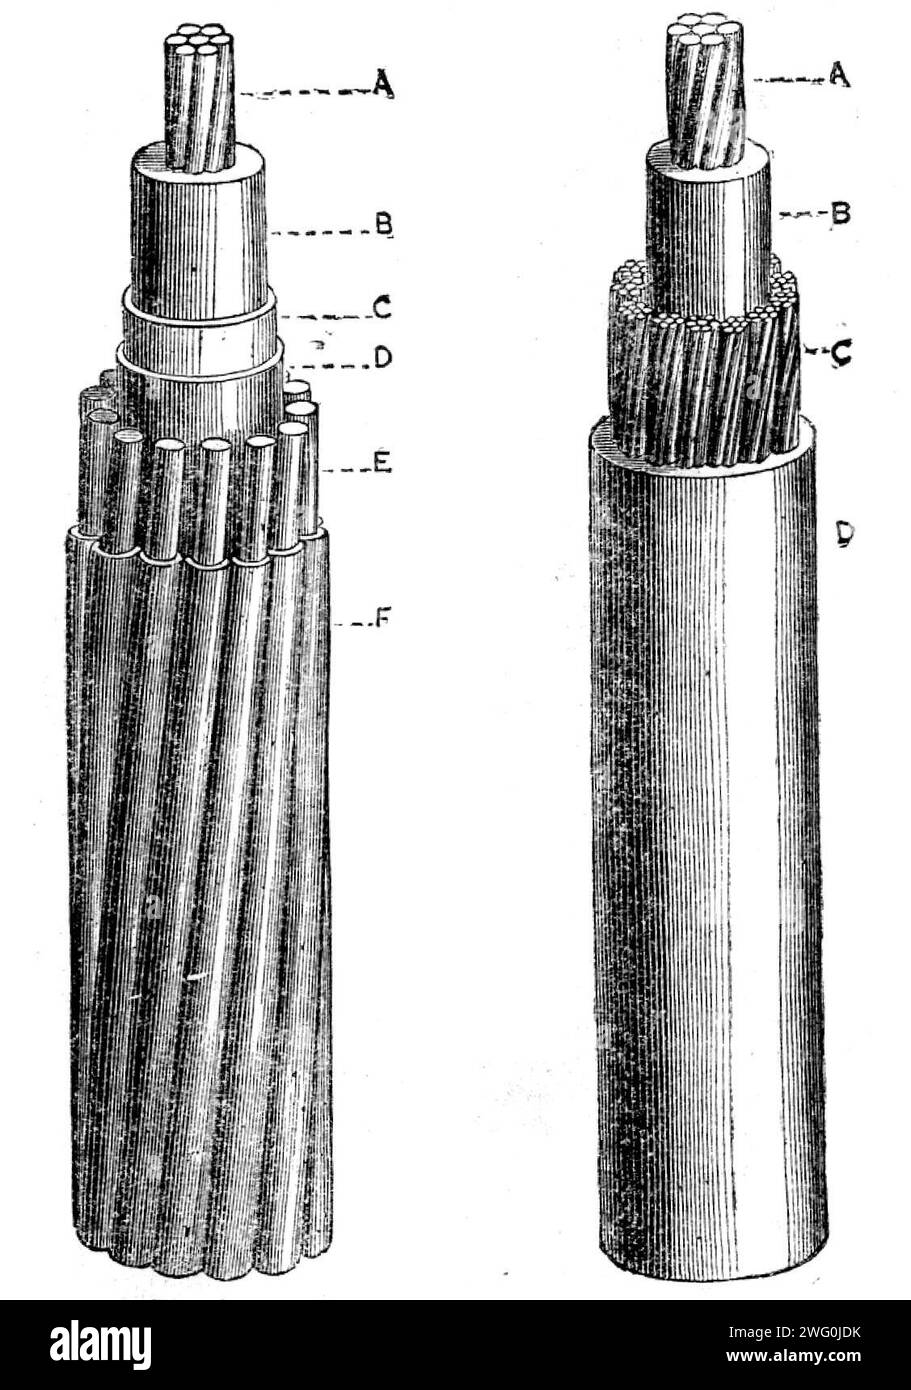 Hooper's patent submarine telegraph cables, 1862. 'Mr. Hooper's cable is composed of the usual copper or other conductor insulated with indiarubber, which is now generally admitted to be by far the best material on account of its high insulating quality, its low inductive capacity, and its being unaffected by the heat of tropical climates...inclosing the indiarubber insulated wire within a jacket or coating of vulcanite or vulcanised indiarubber...decomposition [is prevented], as the indiarubber...becomes firmer by time...Another feature...is the protection of the wires used for tensile streng Stock Photo